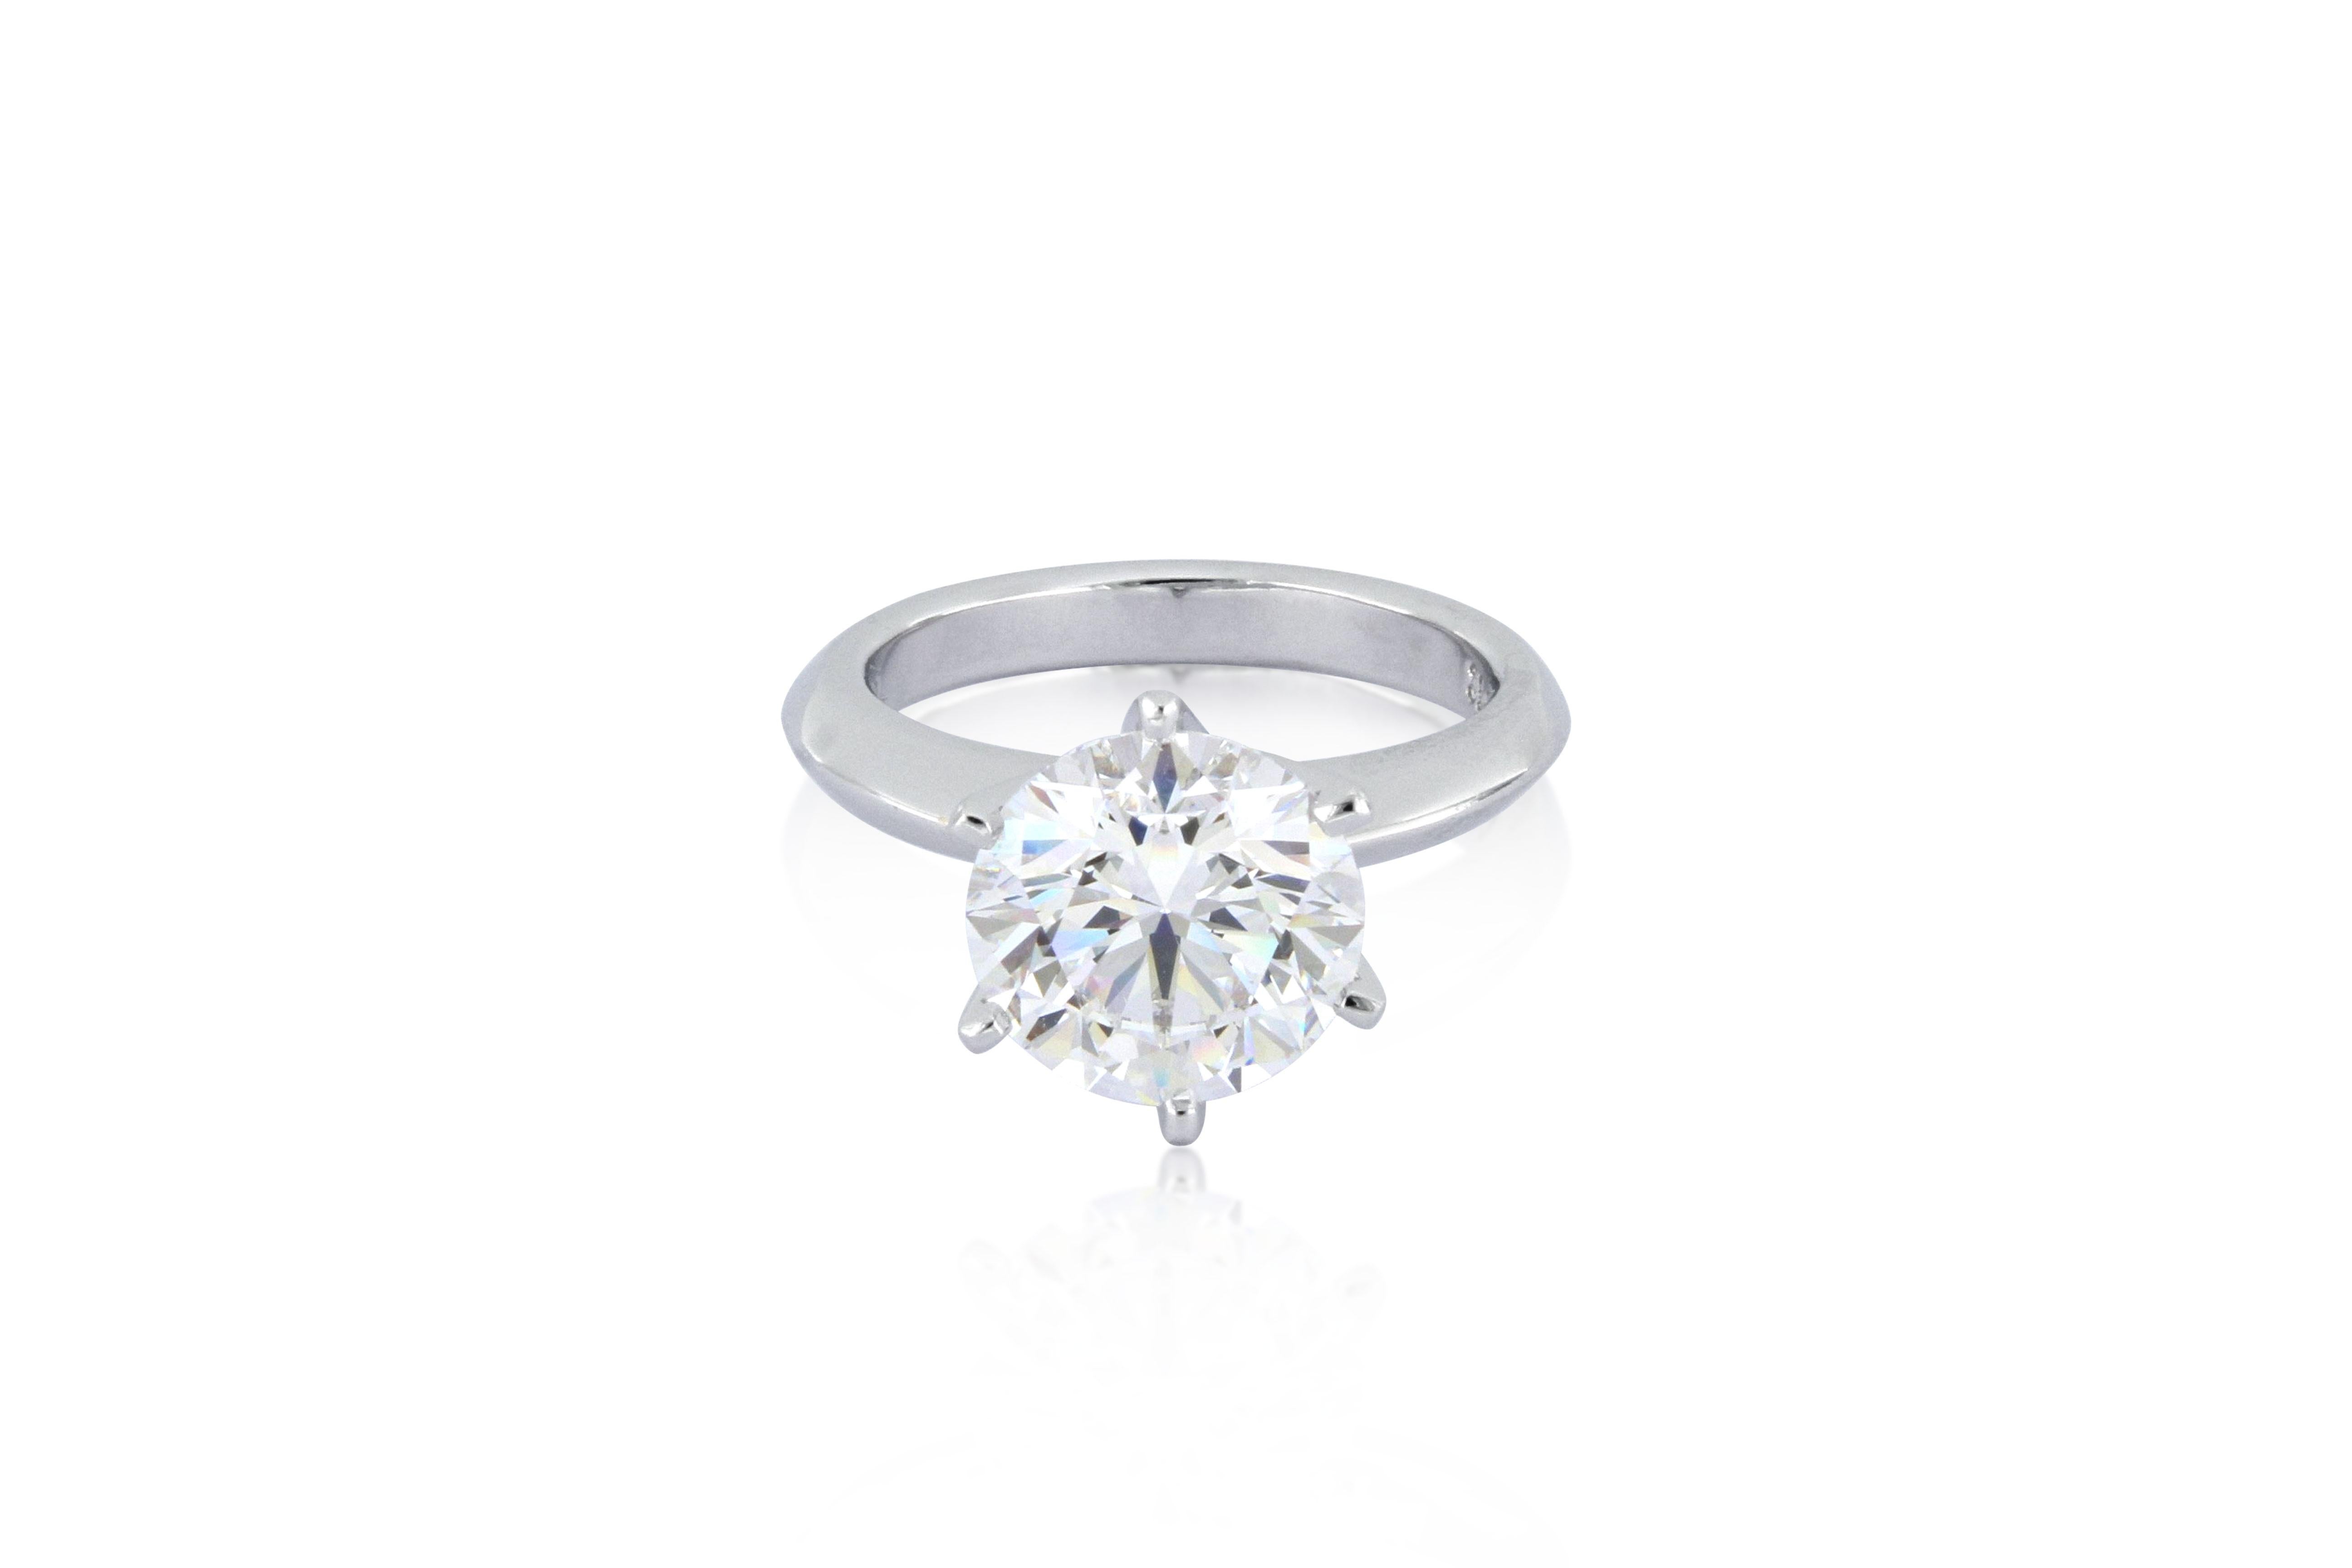 Brilliant Cut 3.52 Carat Natural Diamond Ring in 18K White Gold For Sale